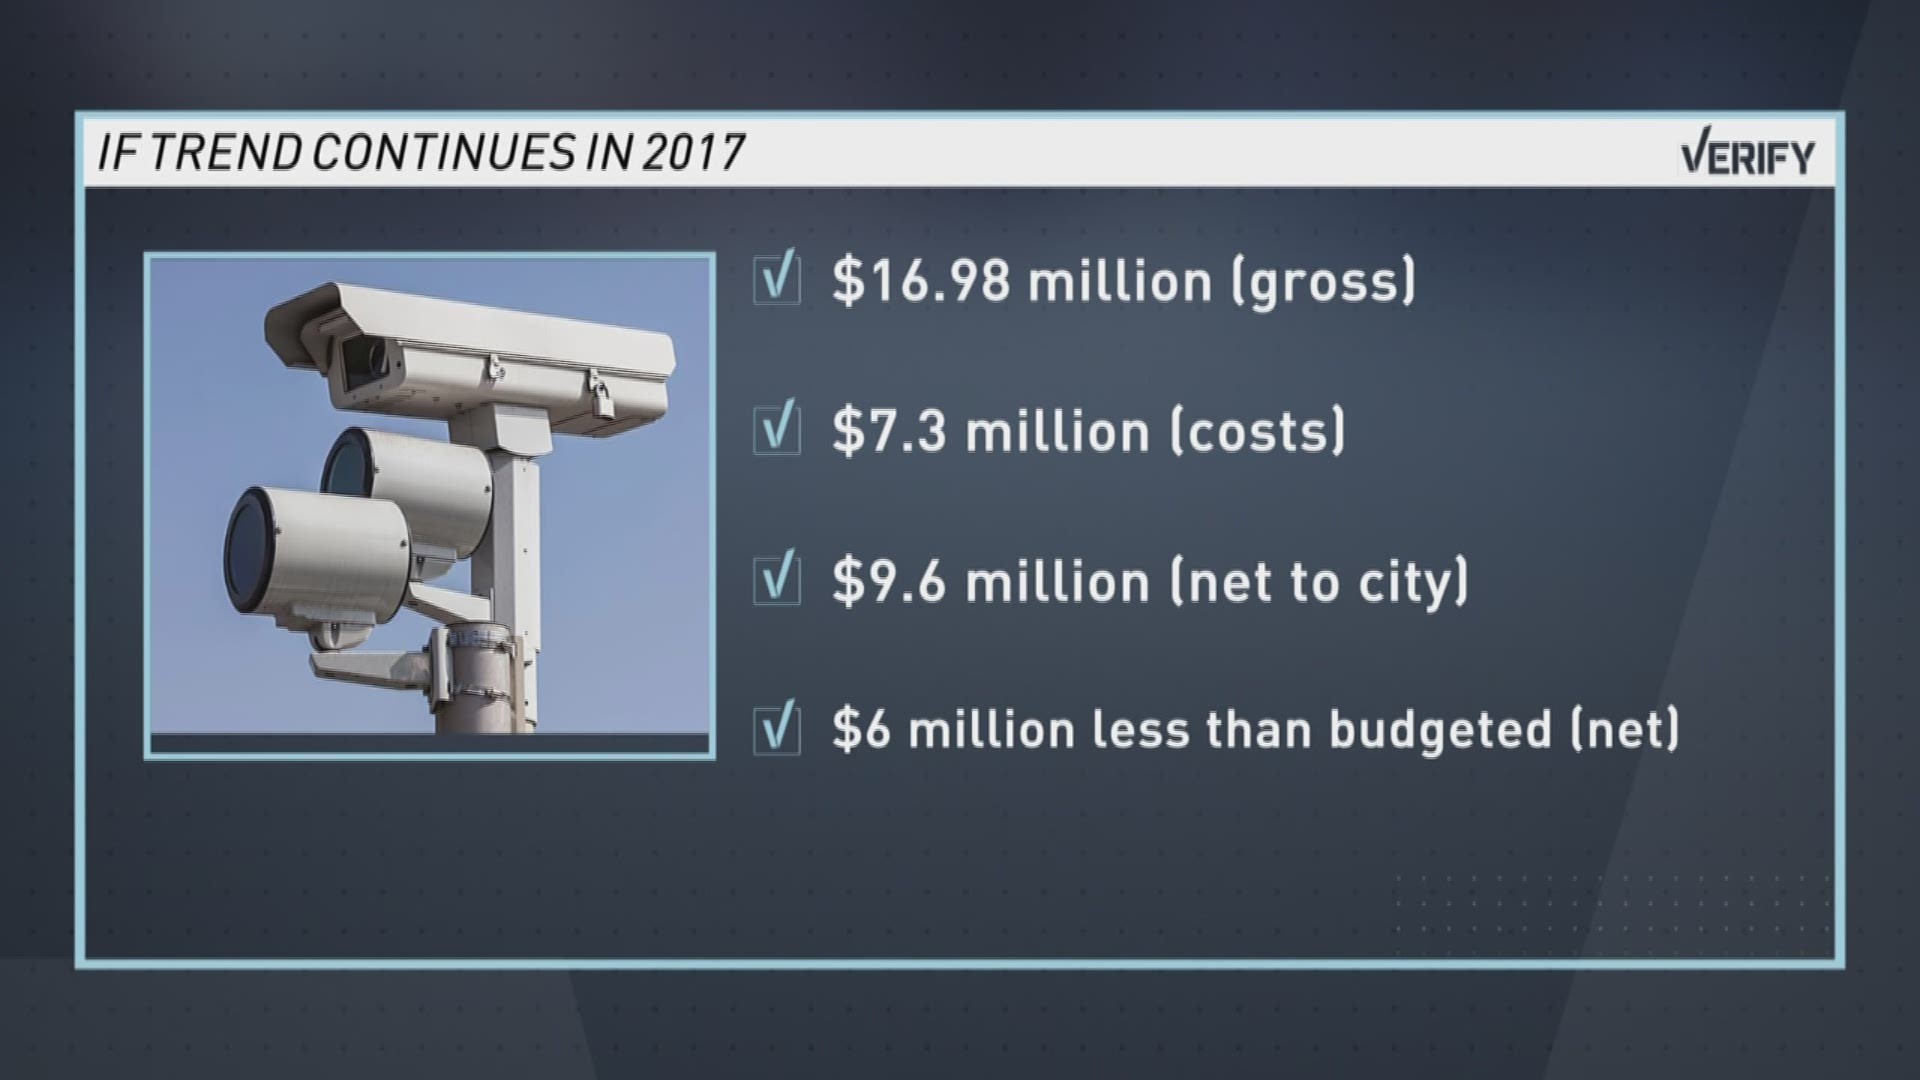 So far this year, the traffic cameras have taken in $11.3 million. If the trend continues, even with nearly twice the amount of cameras on the street, they would only bring in $16.98 million for 2017.